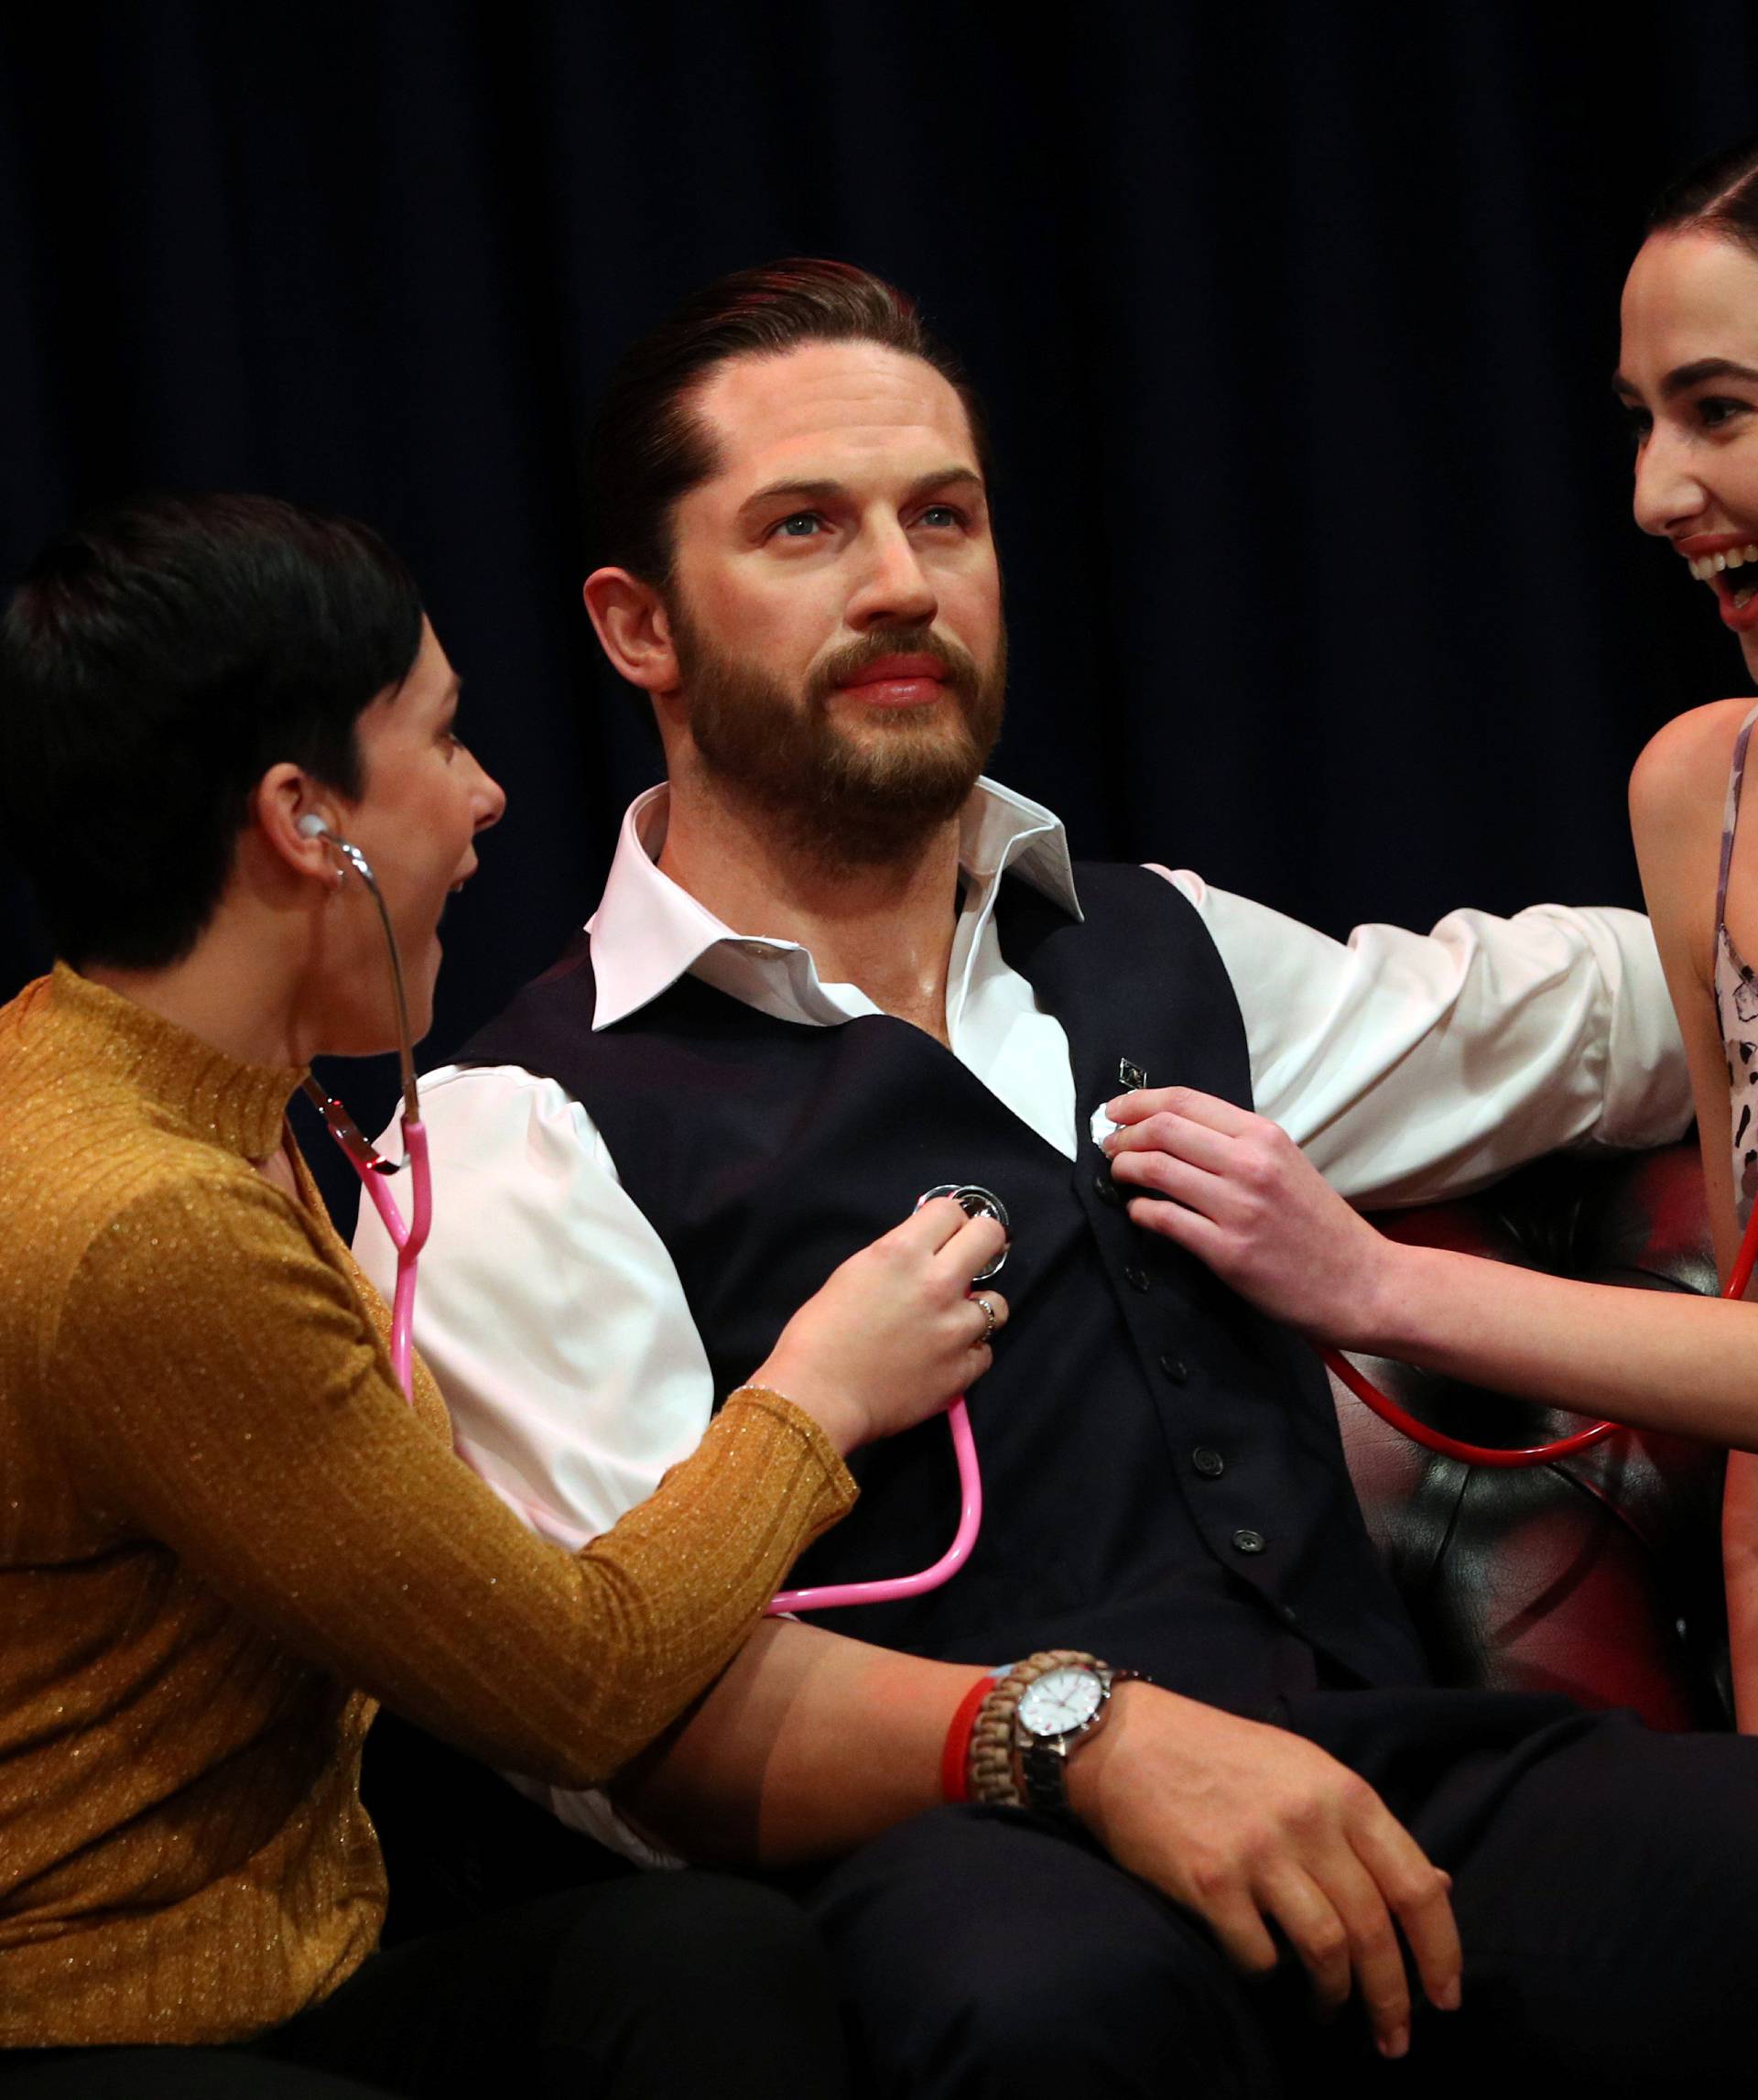 People pose next to Madame Tussauds' wax figure of British actor Tom Hardy which has a soft warm chest and a beating heart, in London